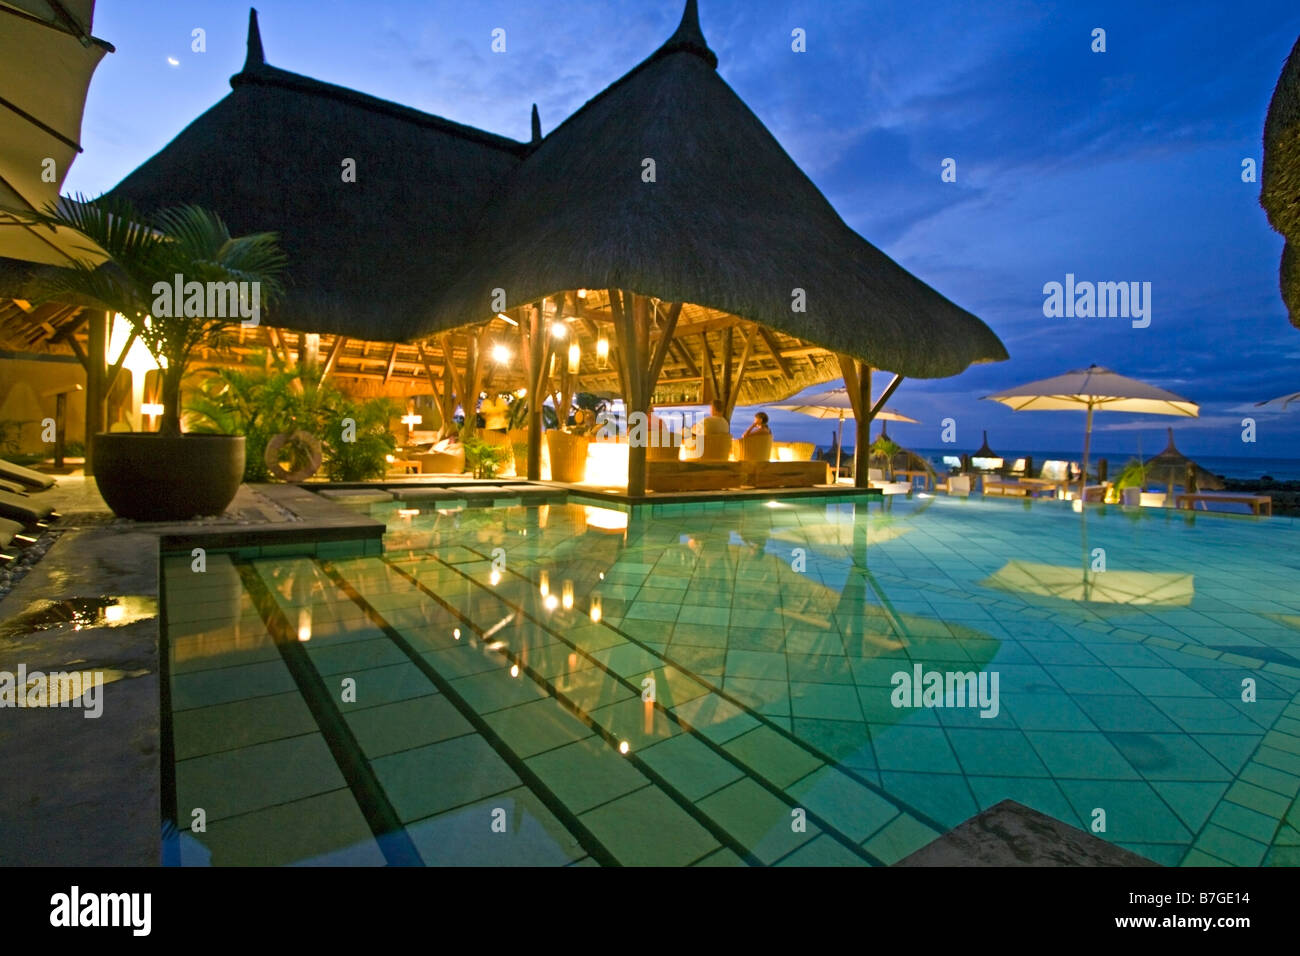 Pool and Hotel Bar of Veranda Hotel Resort and Spa at Troux aux Biches Mauritius Africa Stock Photo